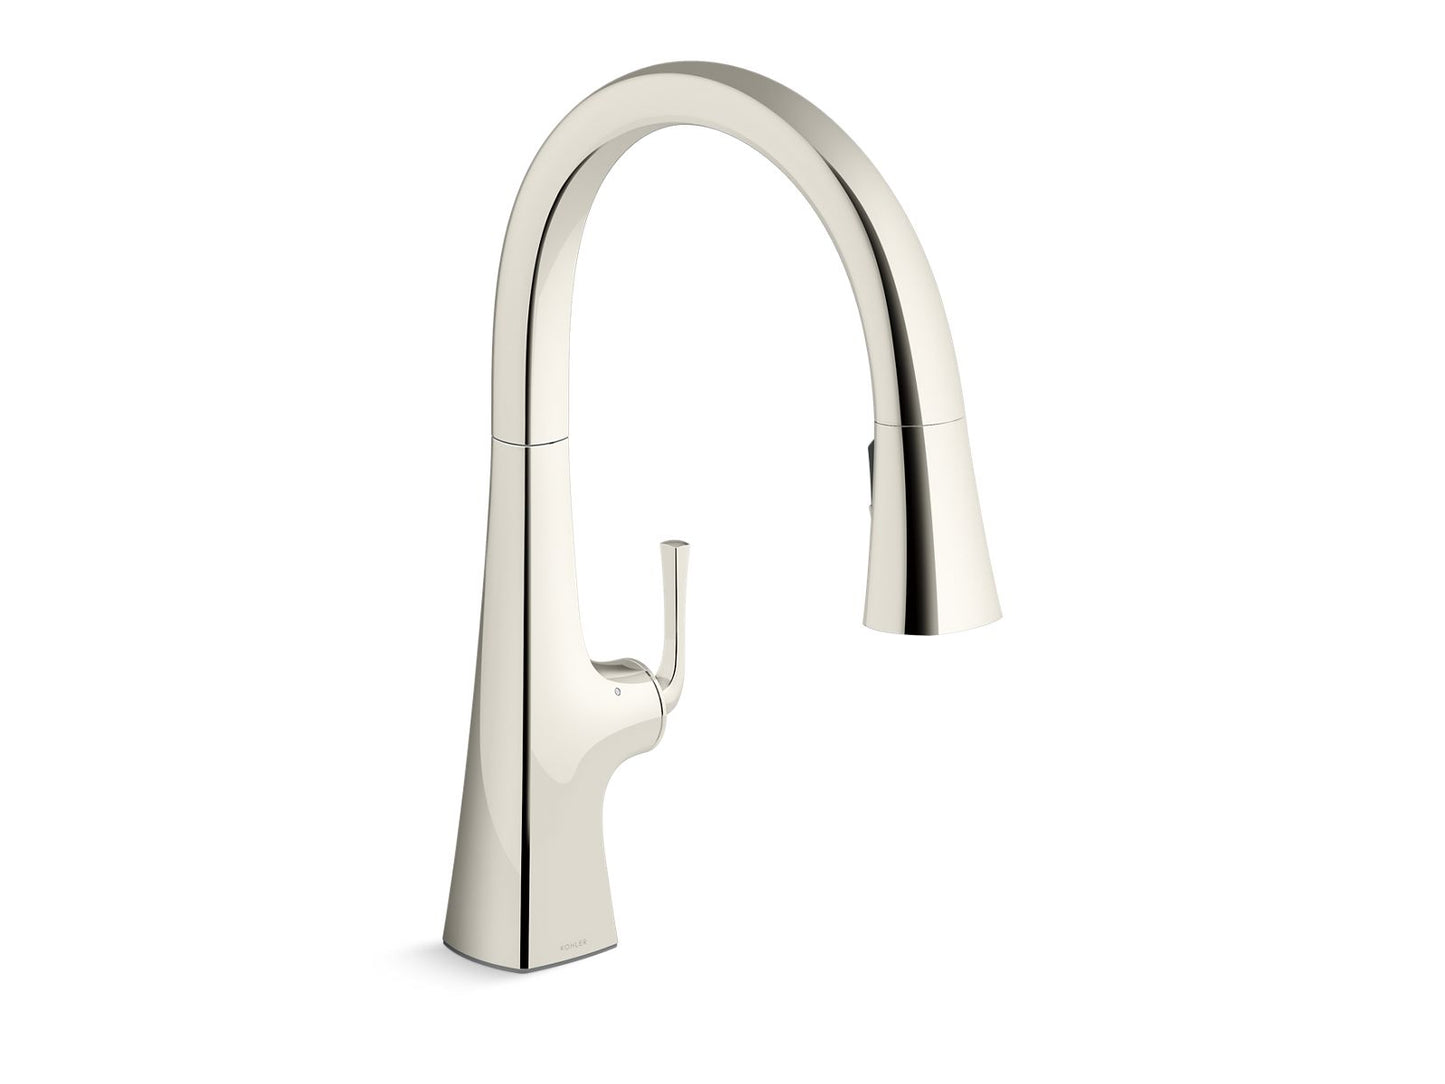 KOHLER K-22068-WB-SN Graze Touchless Pull-Down Kitchen Sink Faucet With Kohler Konnect And Three-Function Sprayhead In Vibrant Polished Nickel